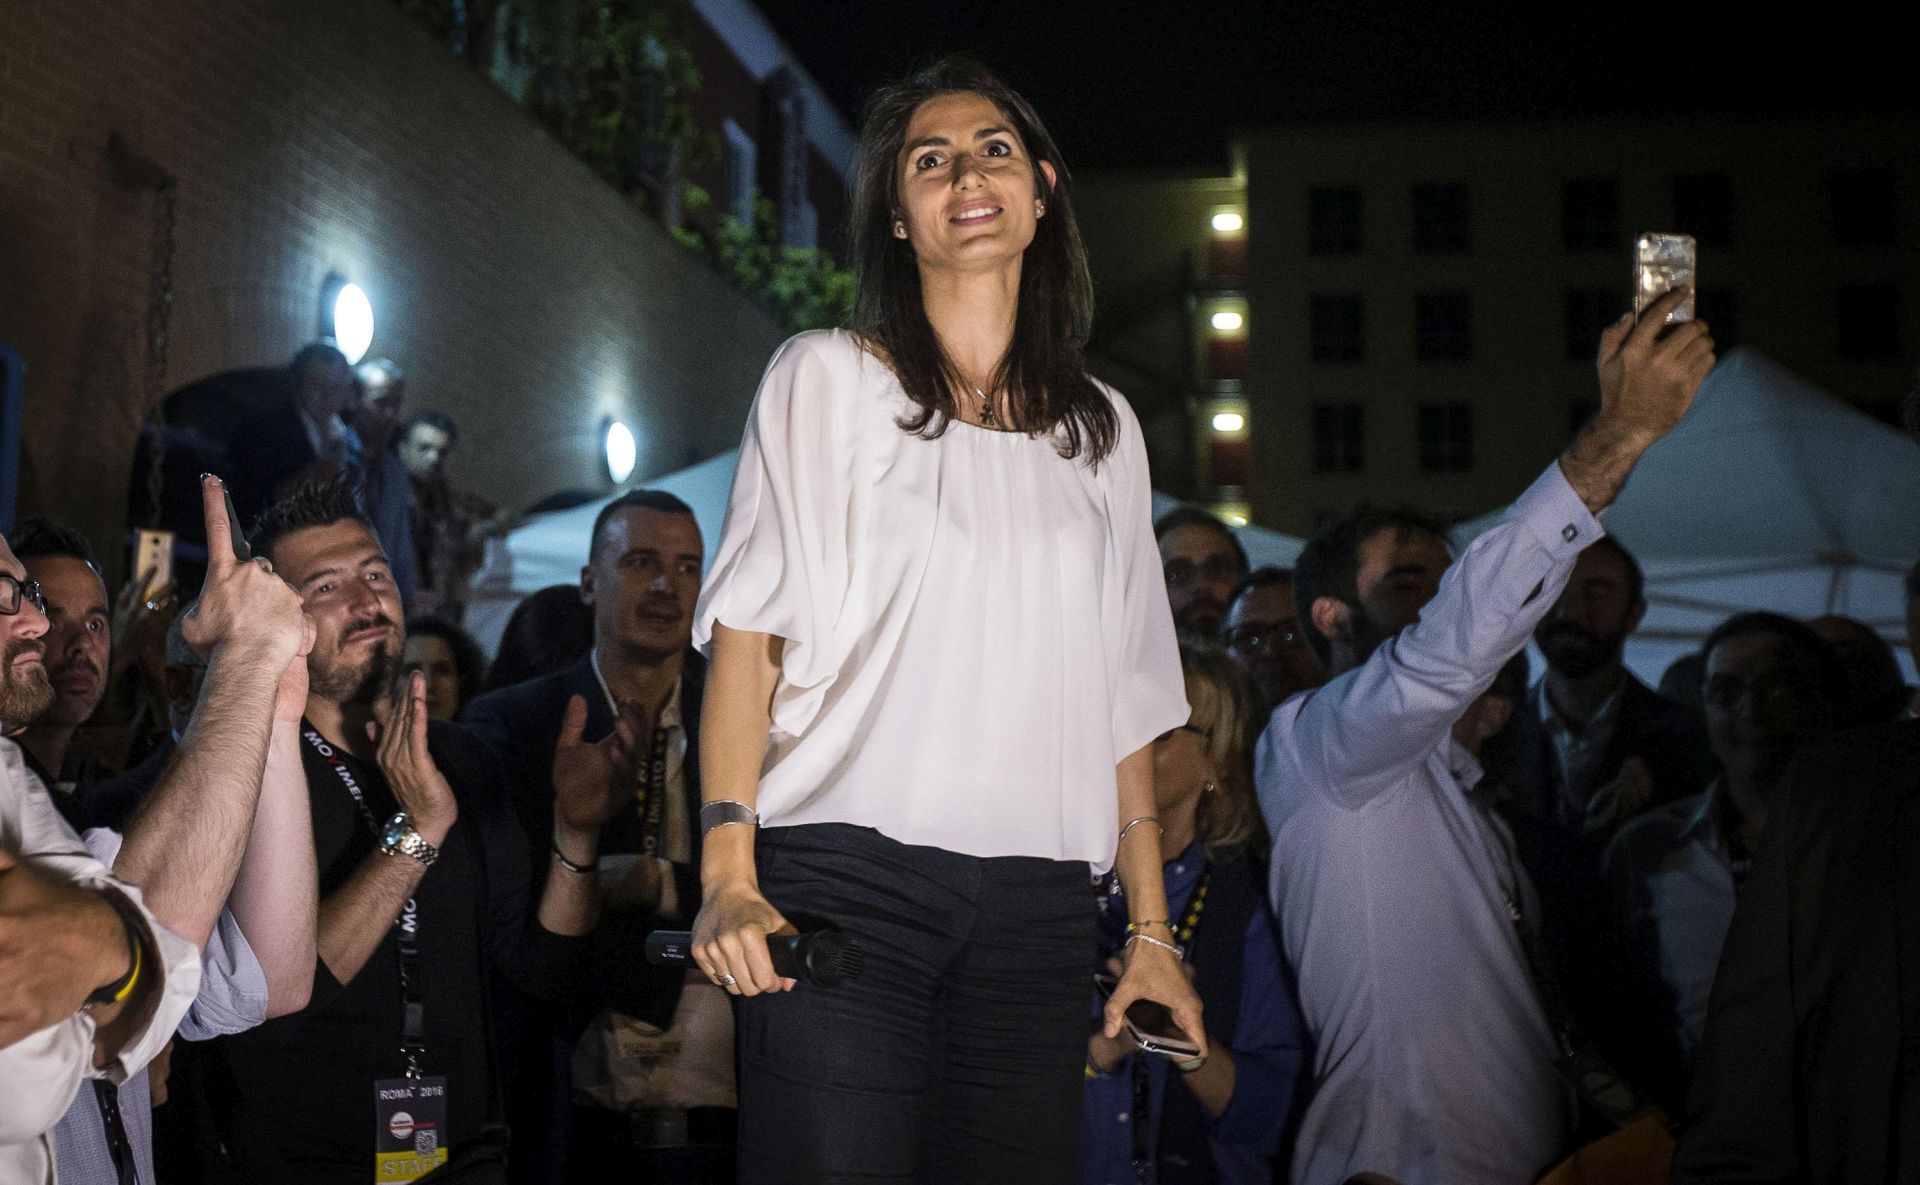 epa05378665 Virginia Raggi (C) of the anti-establishment Five Star Movement (Movimento Cinque Stelle, M5S) political party attends a meeting with supporters outside her caucus in Rome, Italy, 20 June 2016. Raggi, 37, will become Rome's first female mayor after winning in the mayoral elections run-off, according to exit polls.  EPA/ANGELO CARCONI